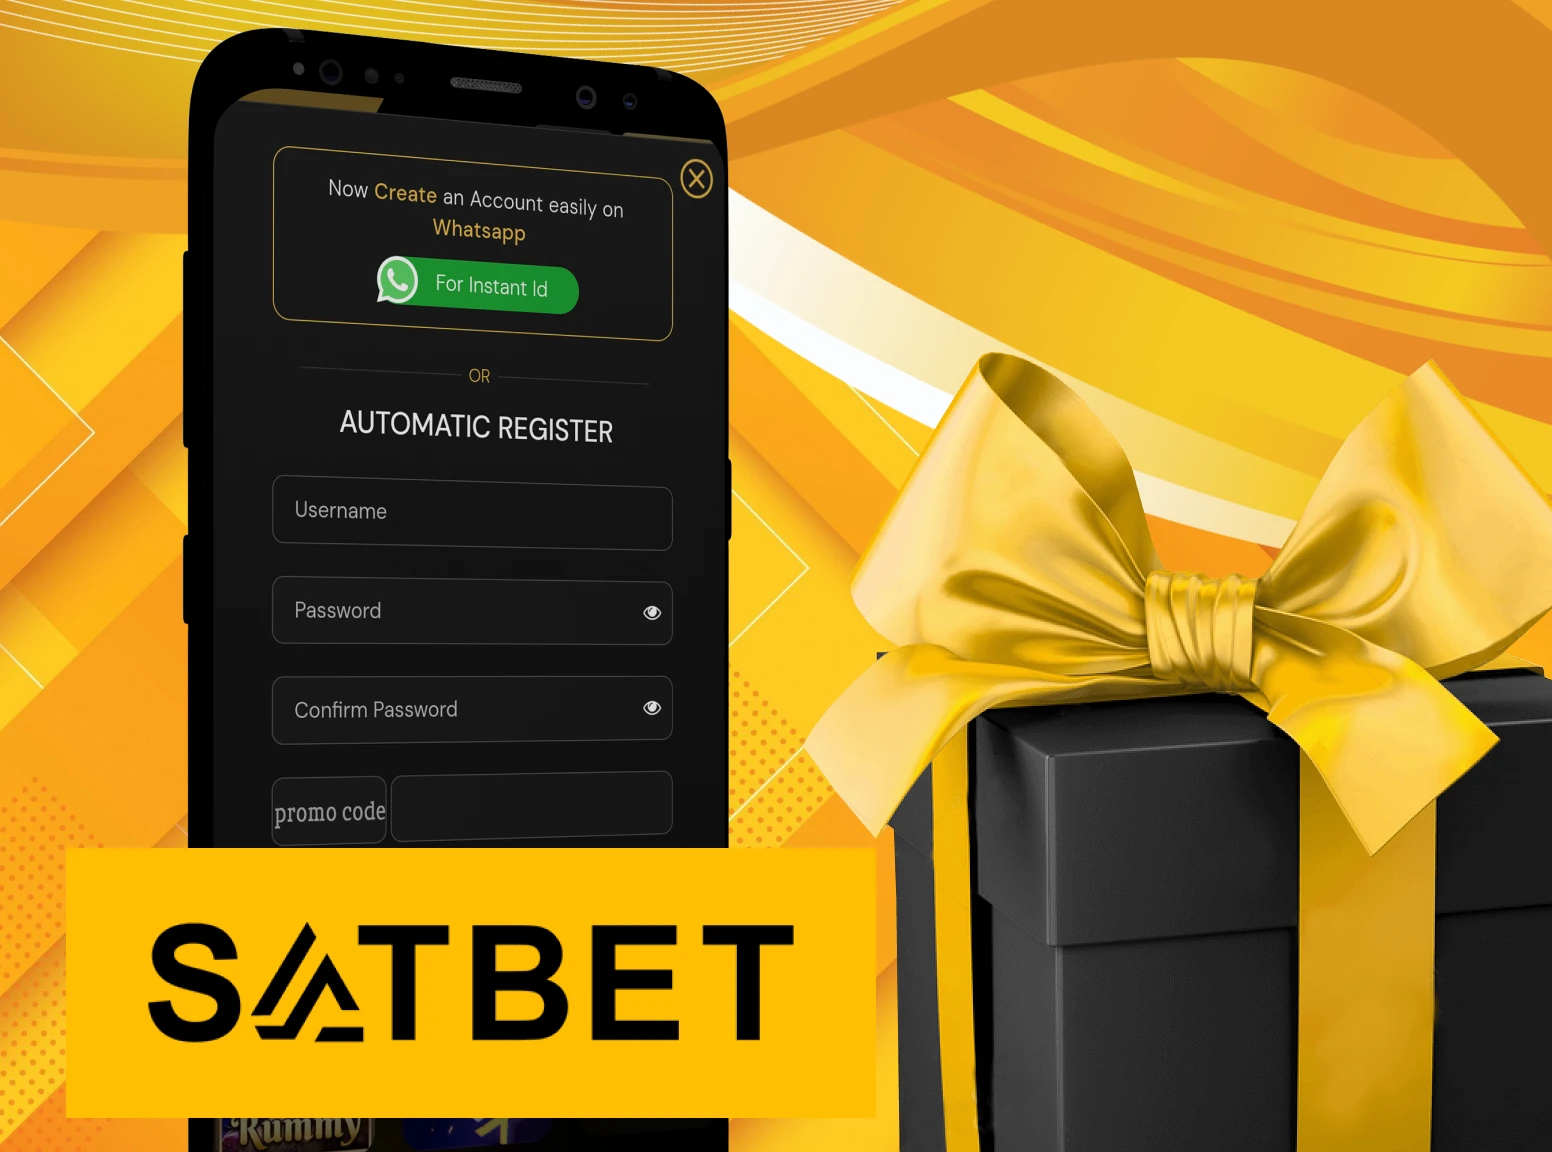 We will tell you how to get a promotional code through the Satbet application.